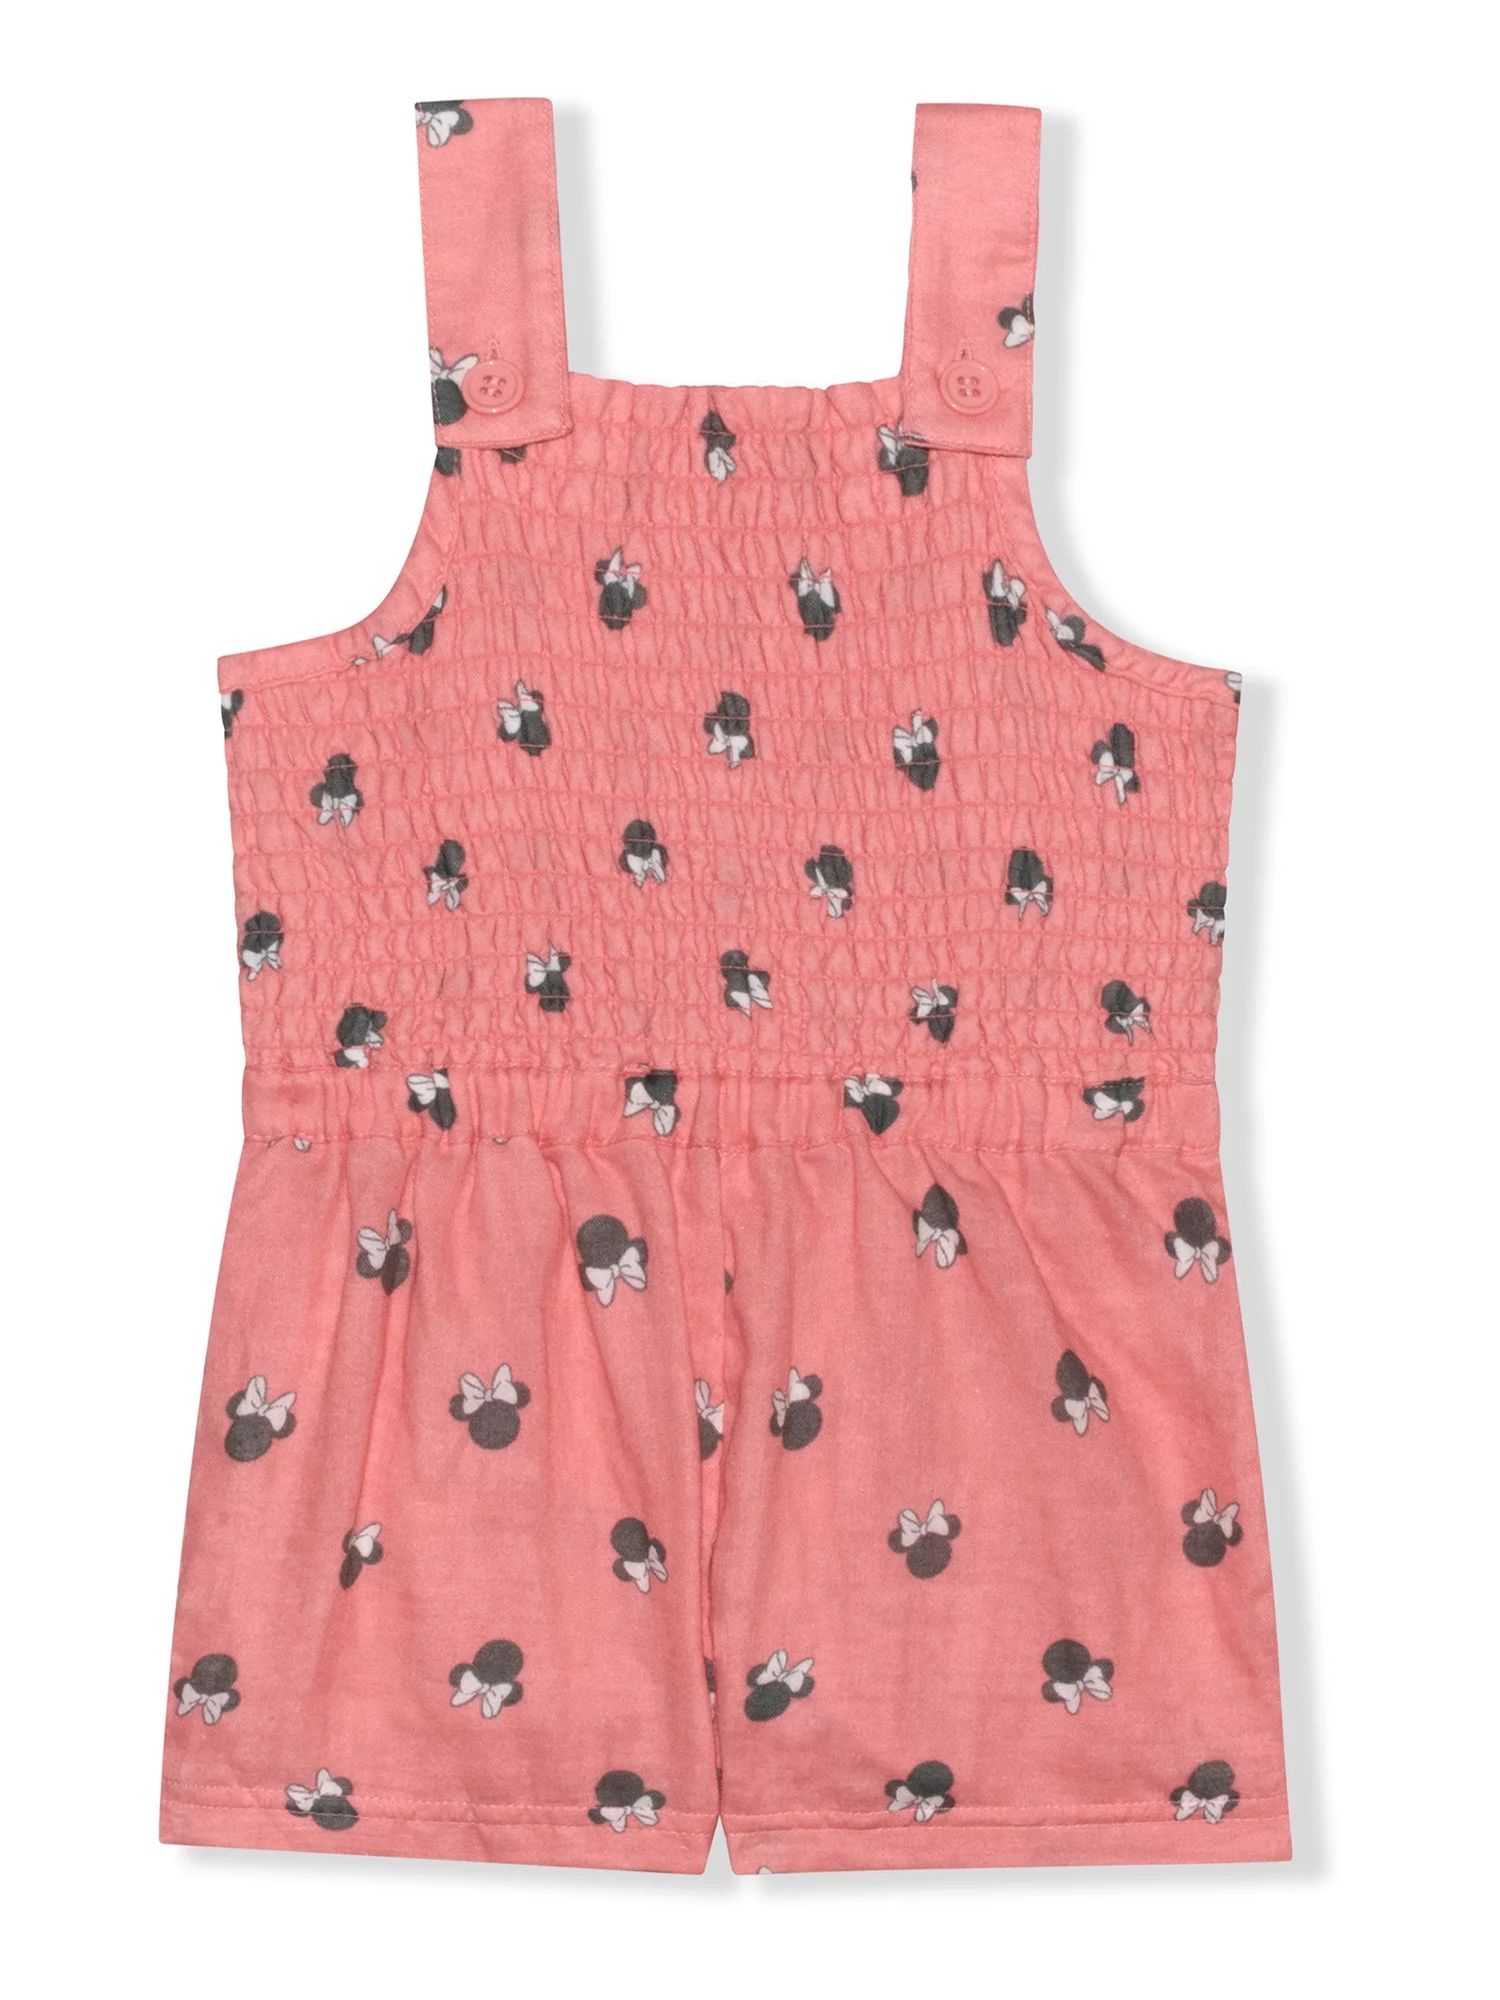 Minnie Mouse Baby and Toddler Girl Romper, 12 Months-5T | Walmart (US)